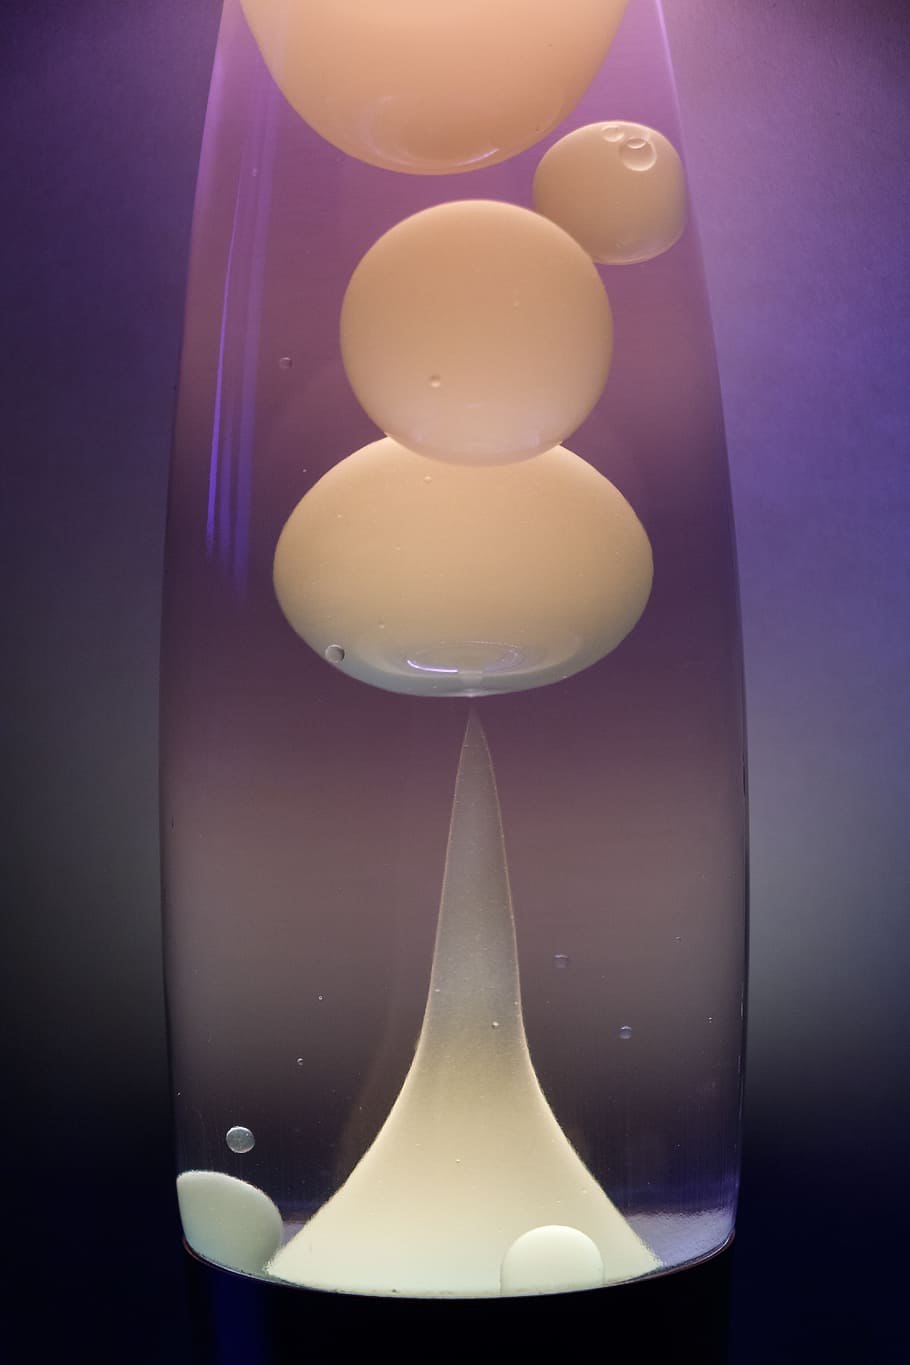 Cool wallpaper for yall Lava lamp look  riphonexwallpapers